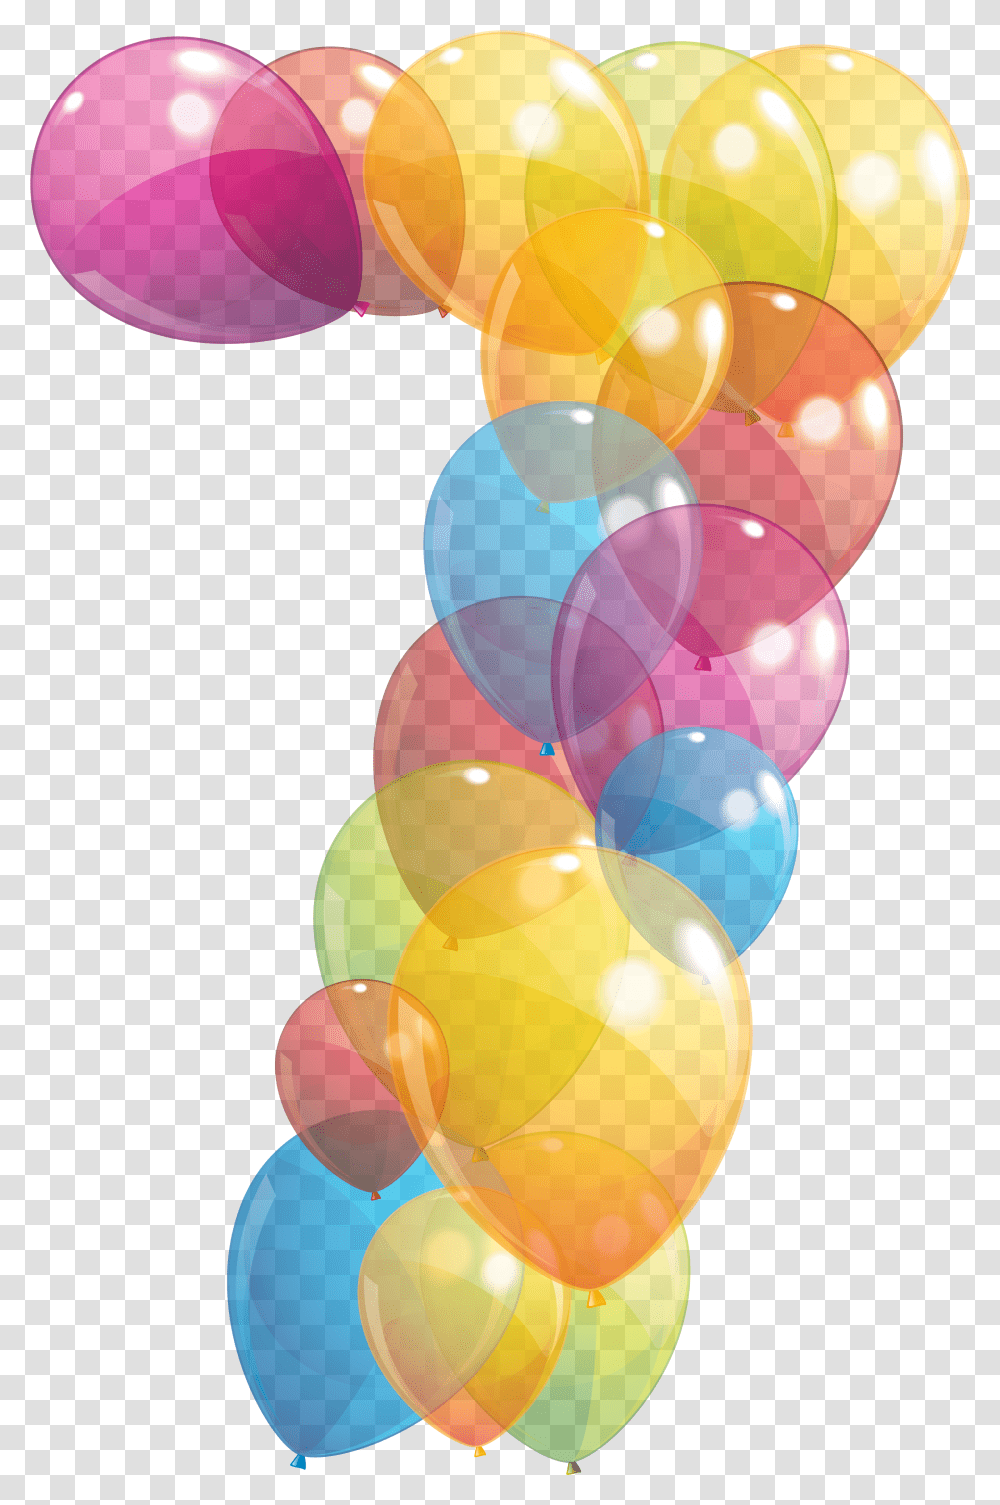 Seven Number Of Balloons Clipart Image 7 Birthday Balloons Transparent Png